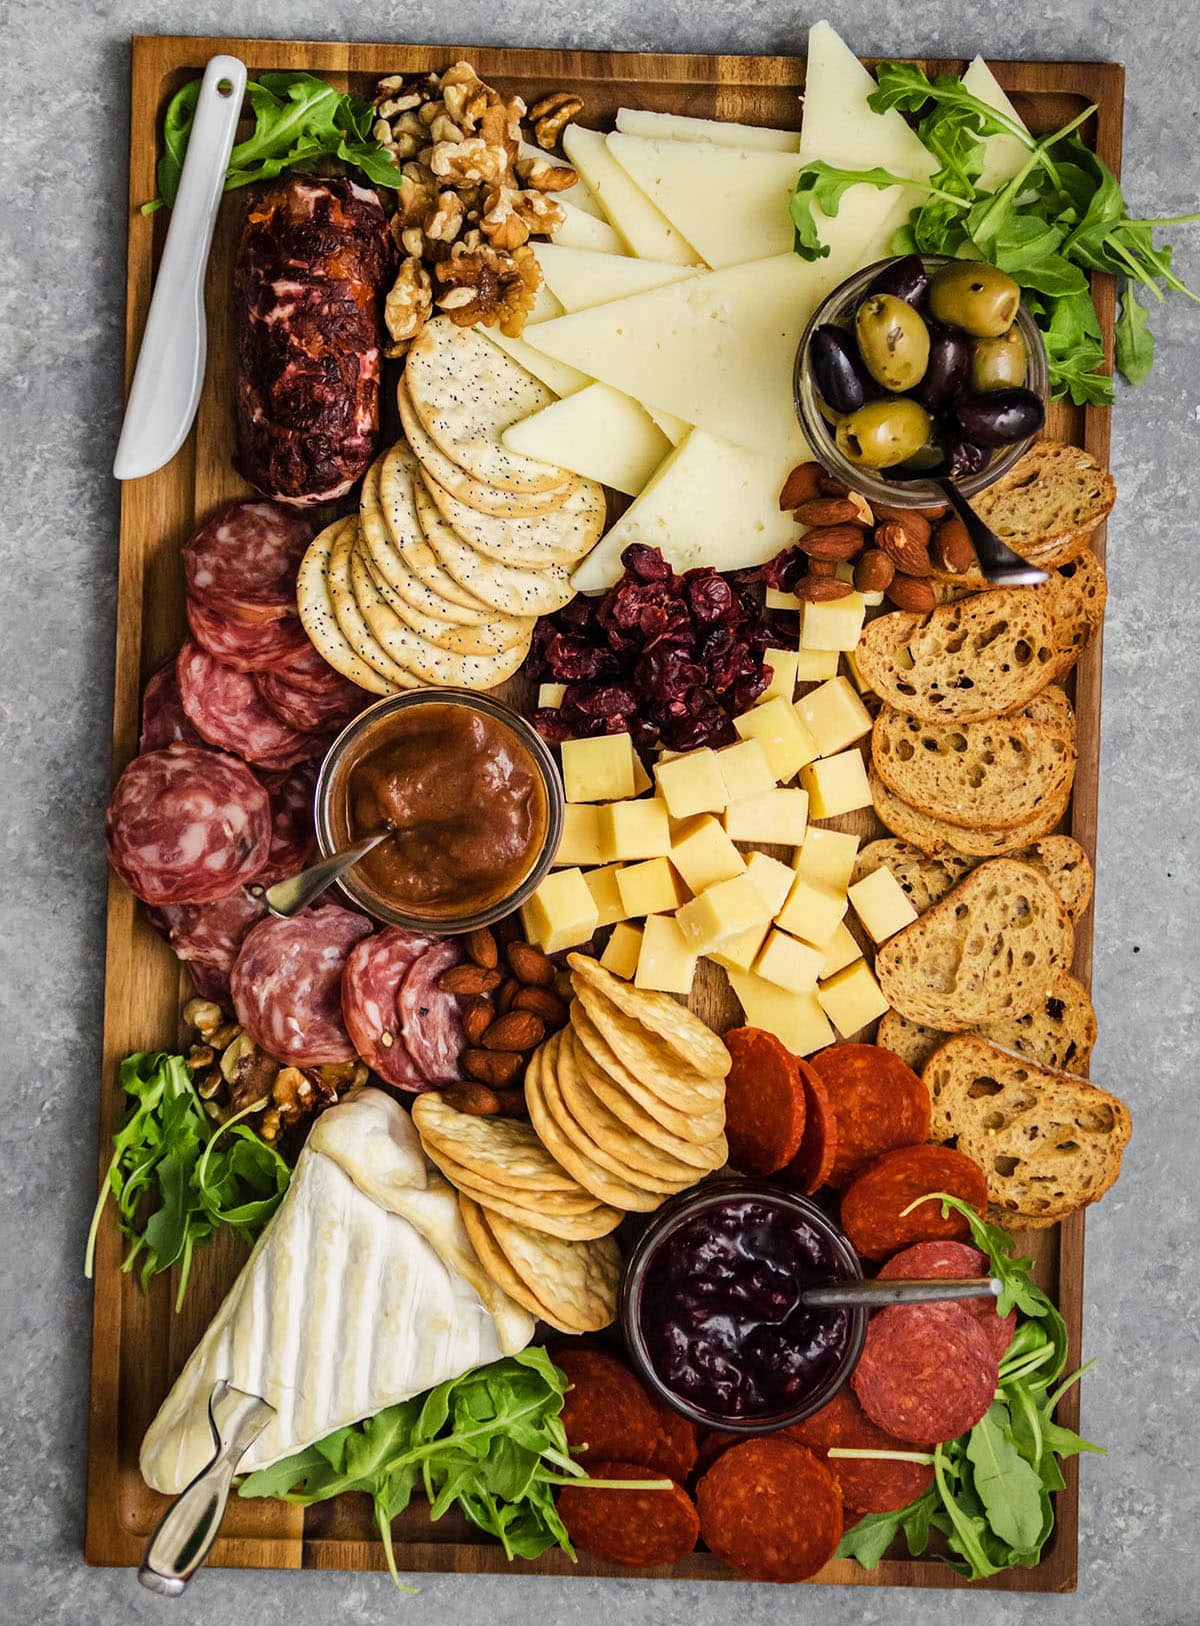 A rectangular meat and cheese board accented by arugula and dried fruit and nuts.